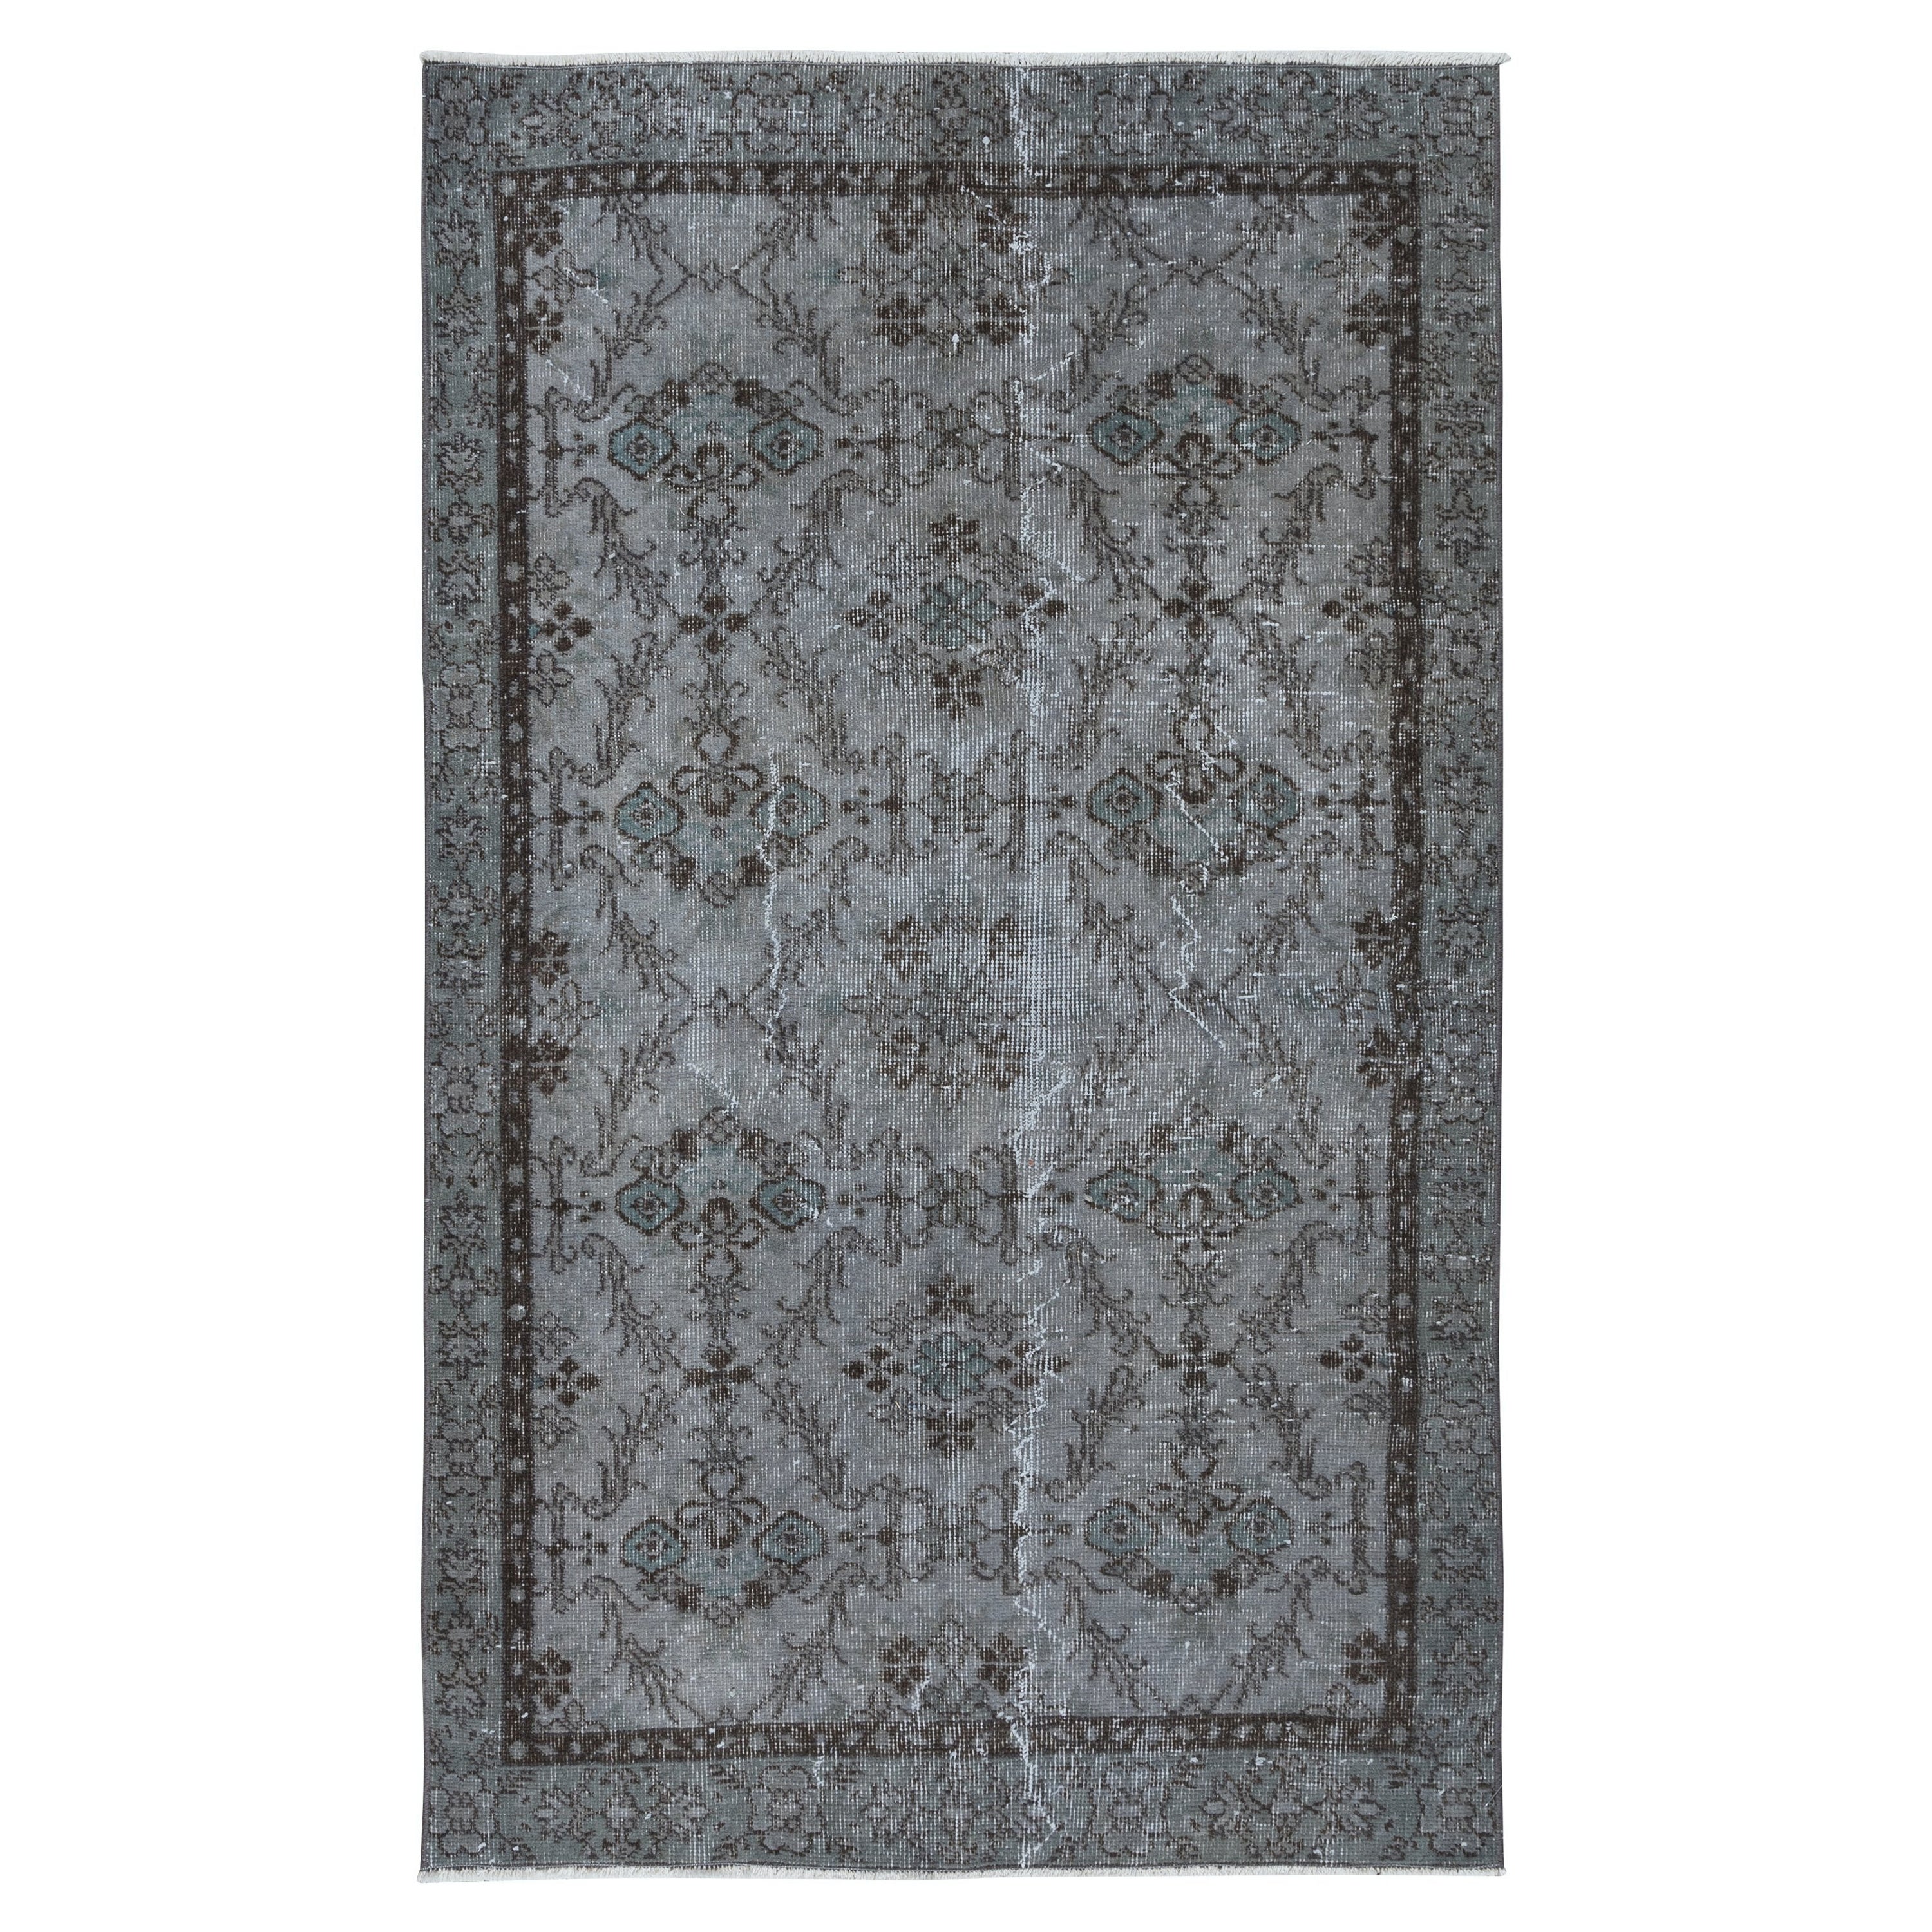 3.7x6 Ft Modern Handmade Turkish Accent Rug in Gray Tones, Low Pile Small Carpet